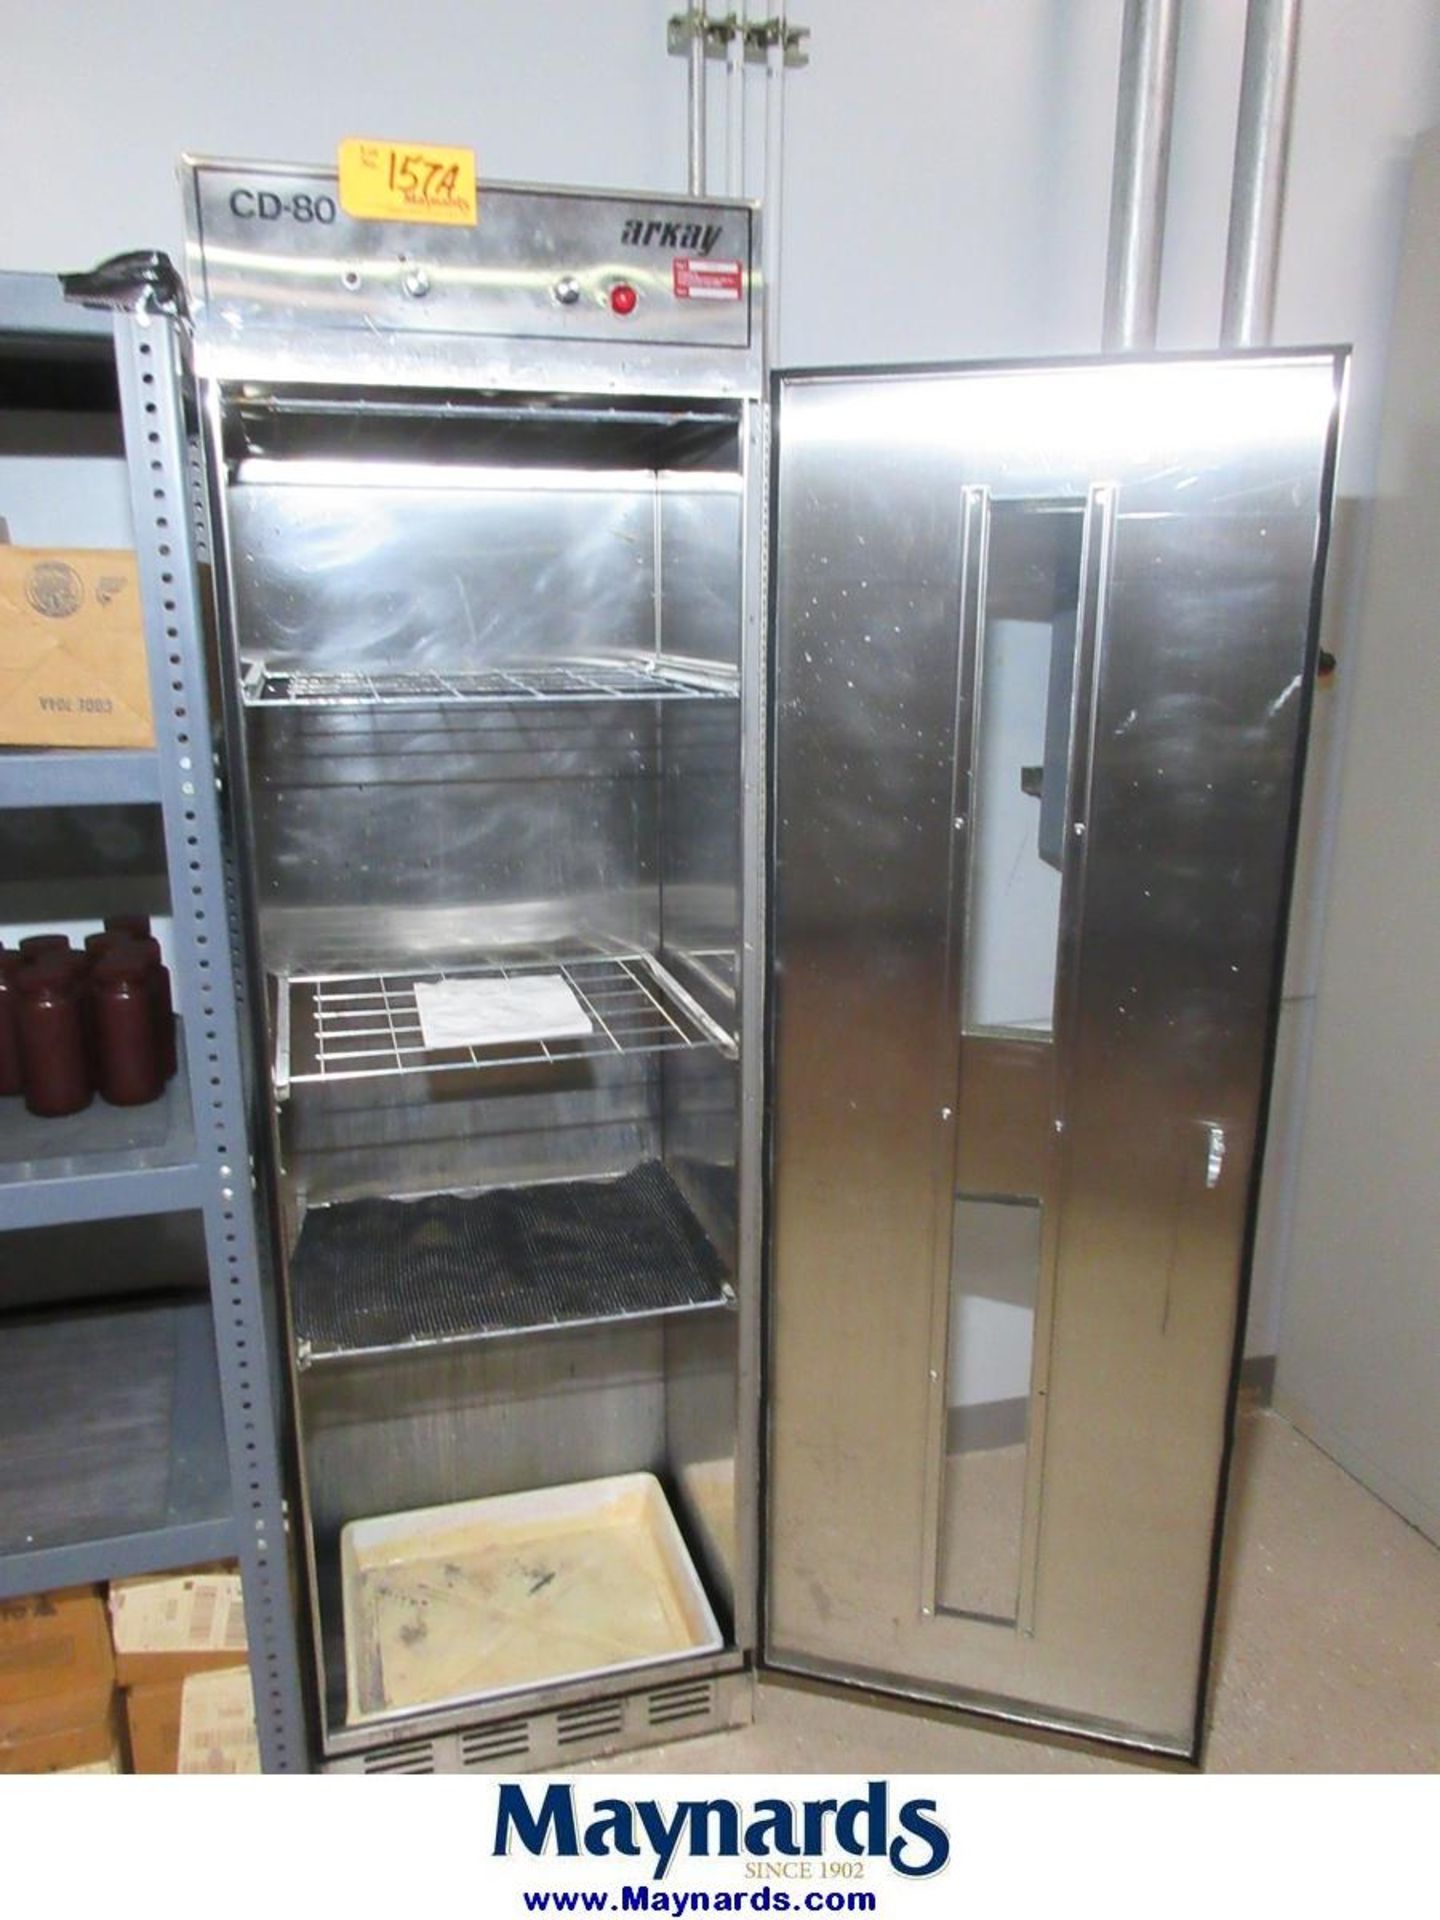 Arkay CD-80 Film Drying Cabinet - Image 3 of 5